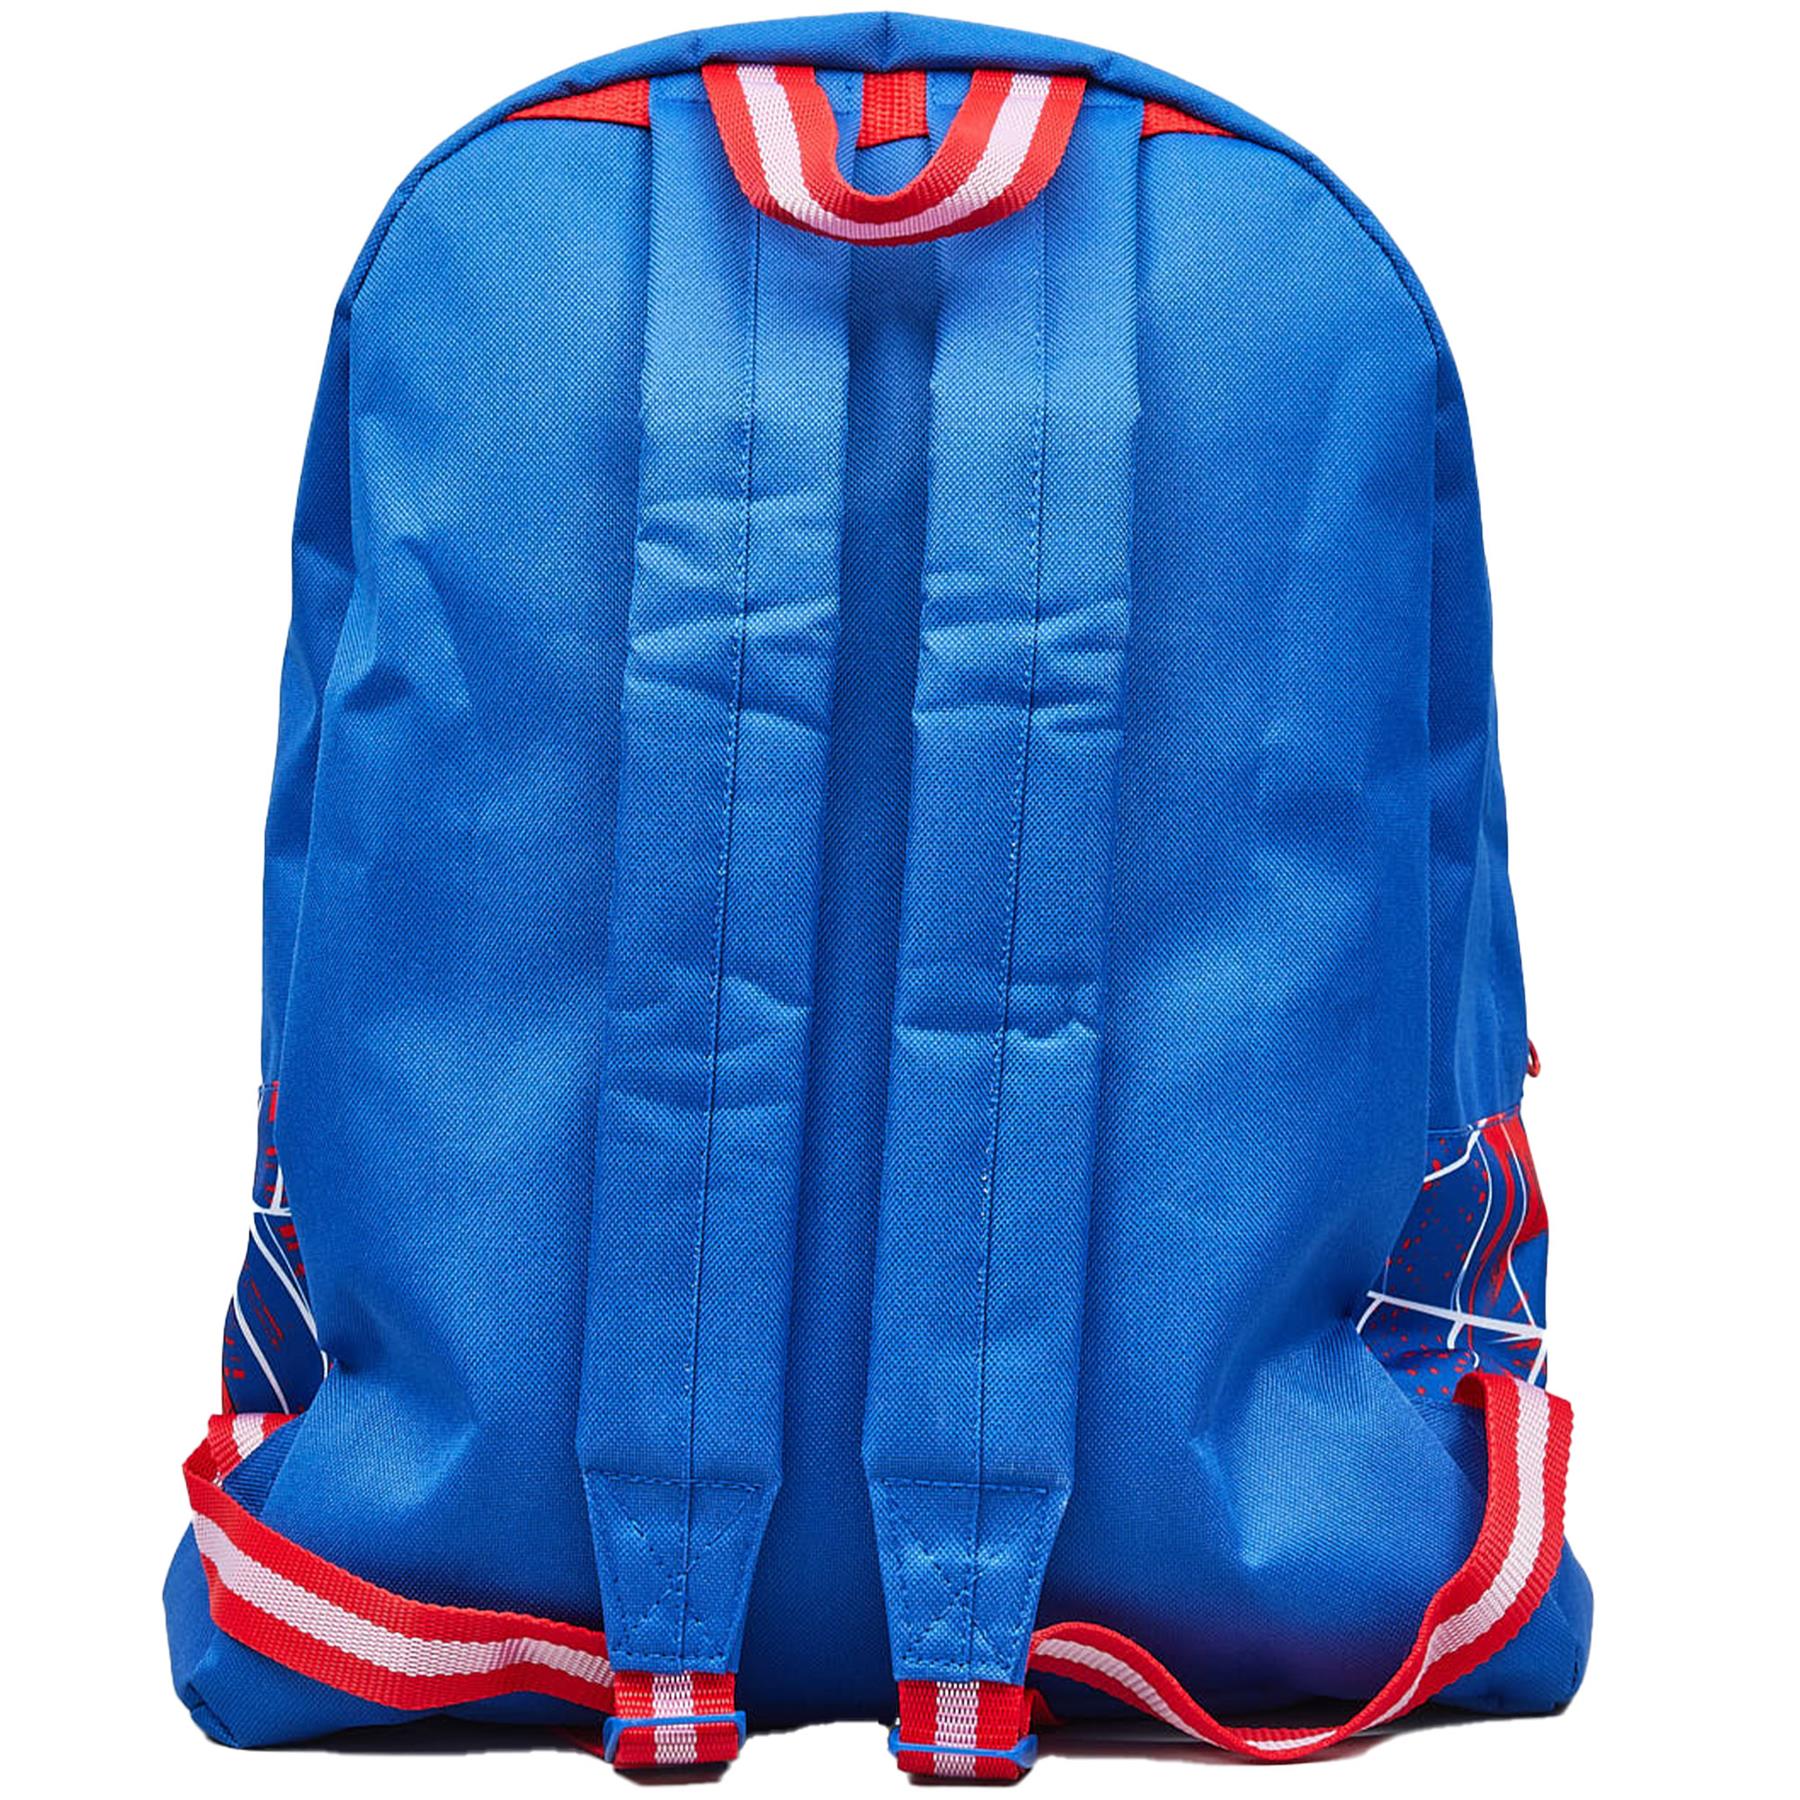 Boys Spiderman Backpack Officially Licensed Marvel Amazing Roxy Urban Sports Bag